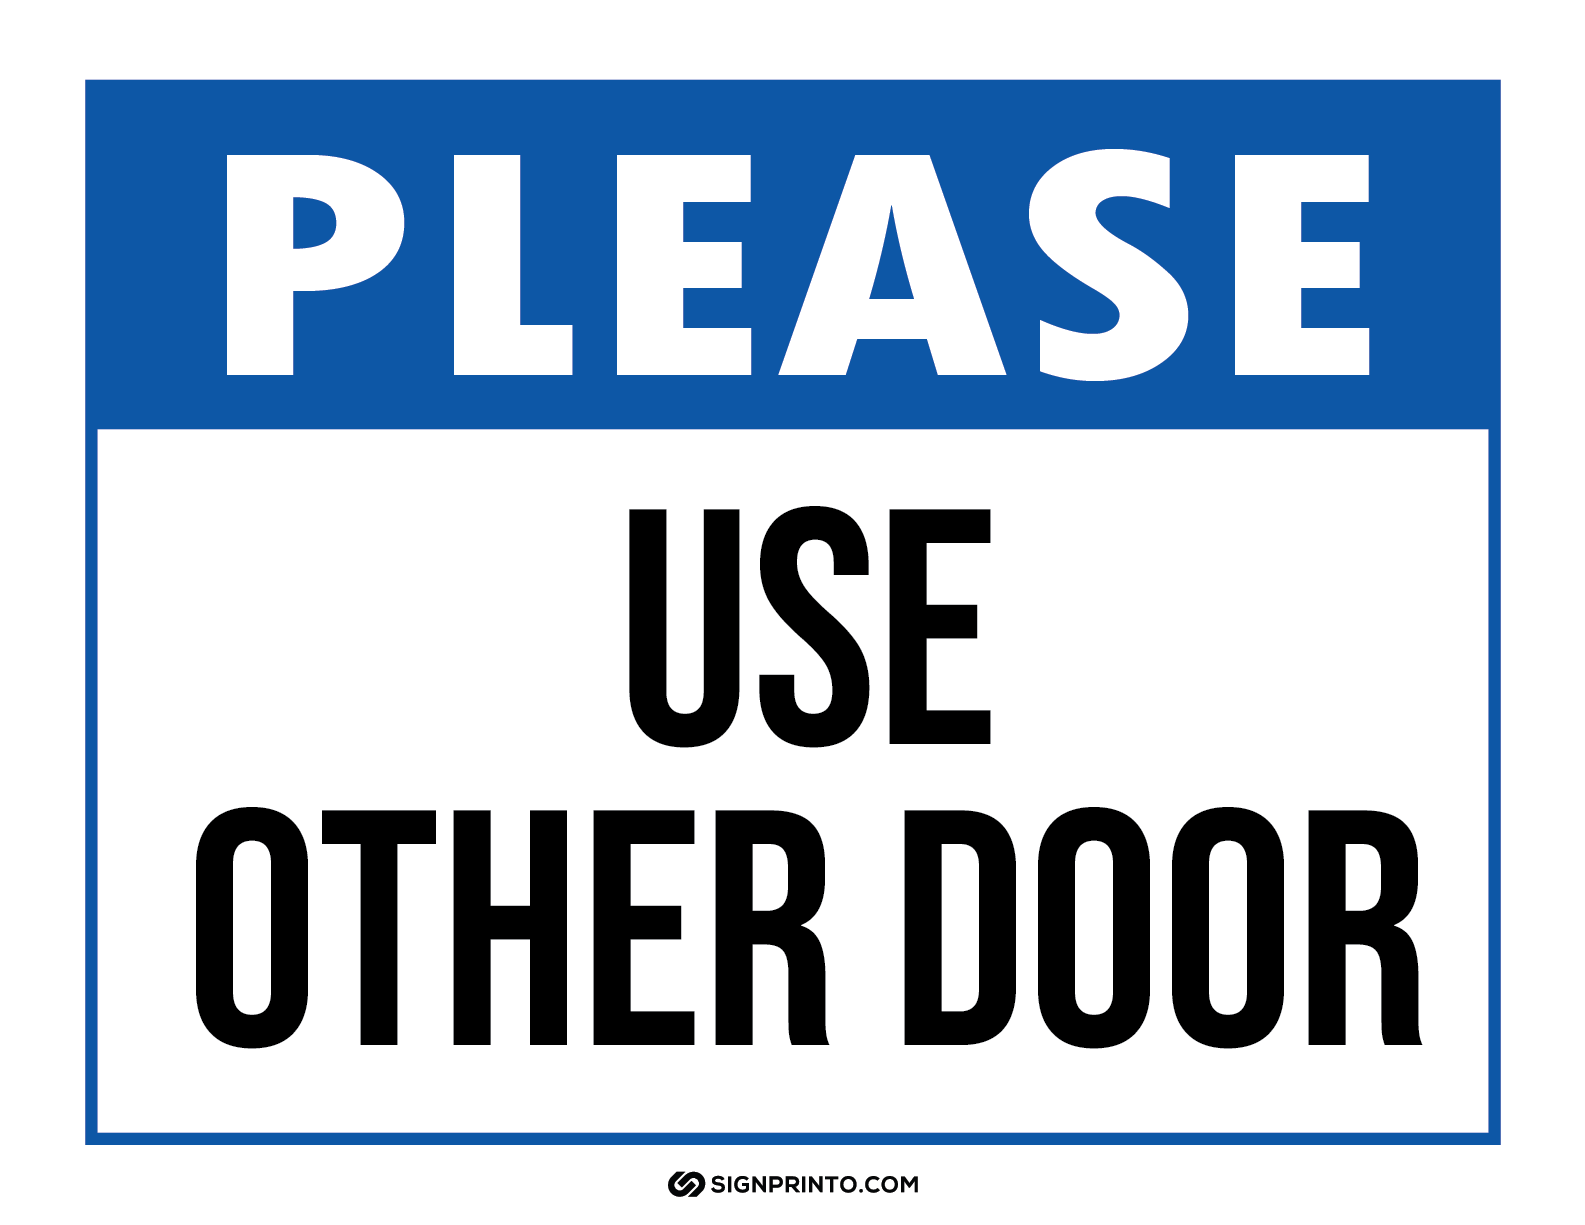 Printable Use Other Door Sign